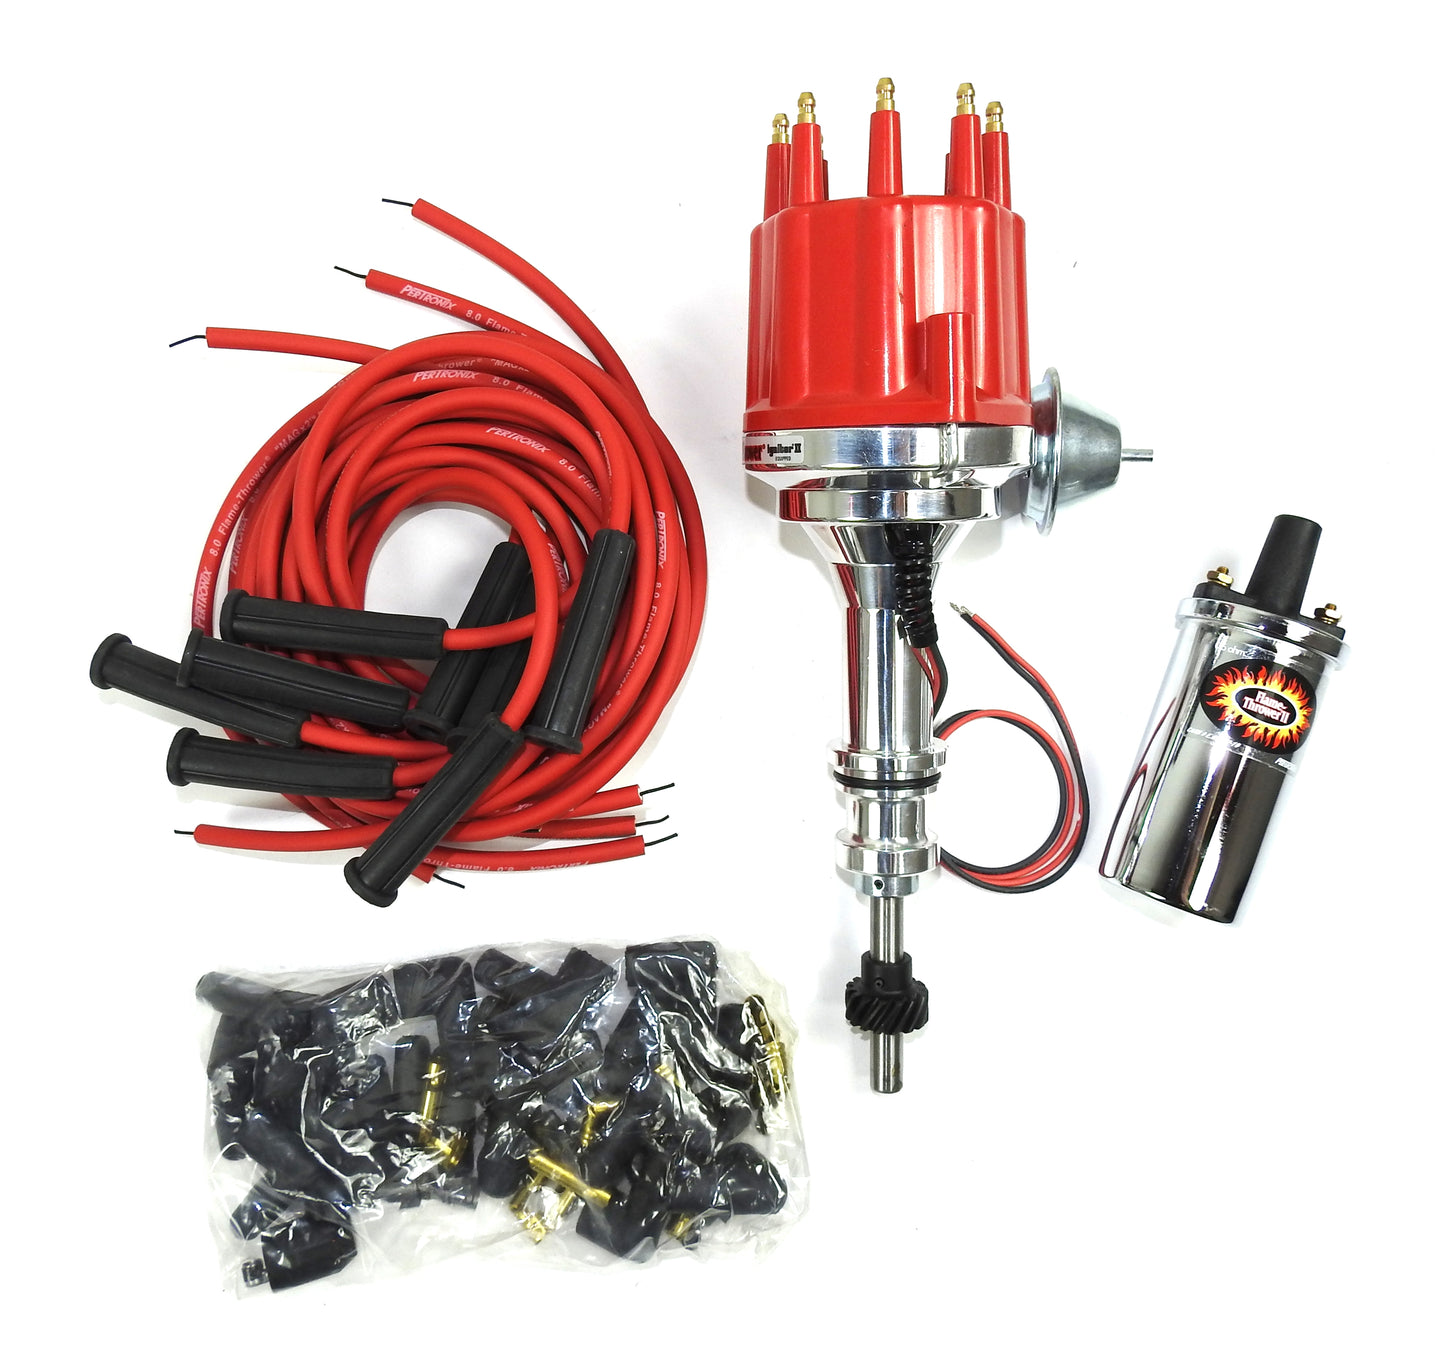 Pertronix Bundle009 Ignition Kit includes Ford 351W Billet Plug n Play Distributor with Red Male Cap, Flame-Thrower II Chrome Coil, Flame-Thrower MAGx2 Universal Red Spark Plug Wires with 180 degree plug boot ends